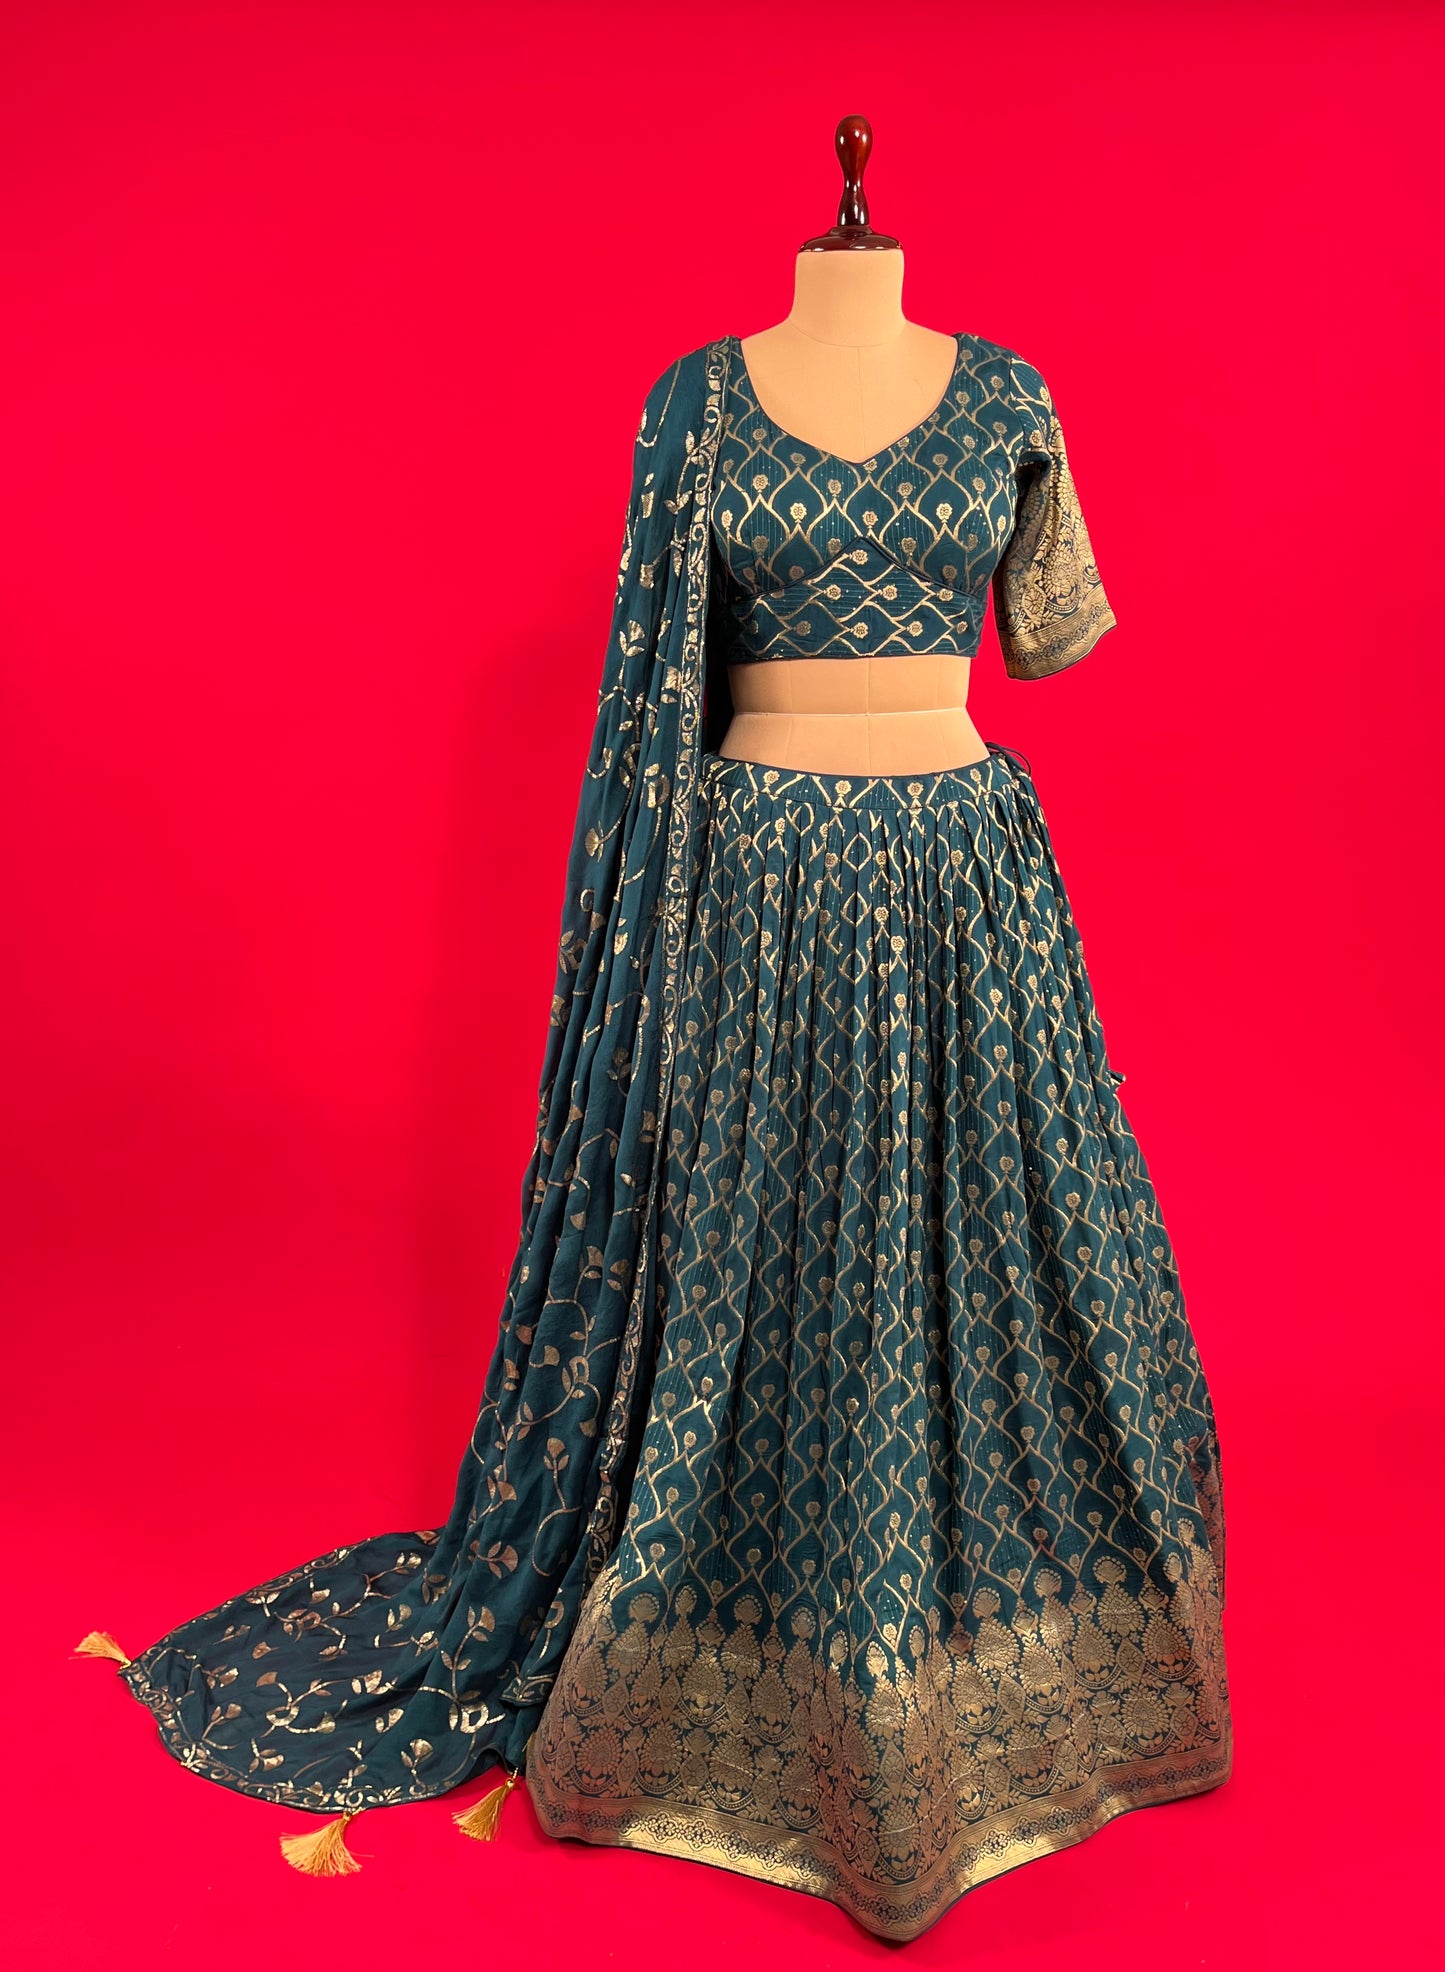 TEAL BLUE COLOUR BANARASI LEHENGA WITH READYMADE BLOUSE & CHINON DUPATTA EMBELLISHED WITH SEQUINS WORK